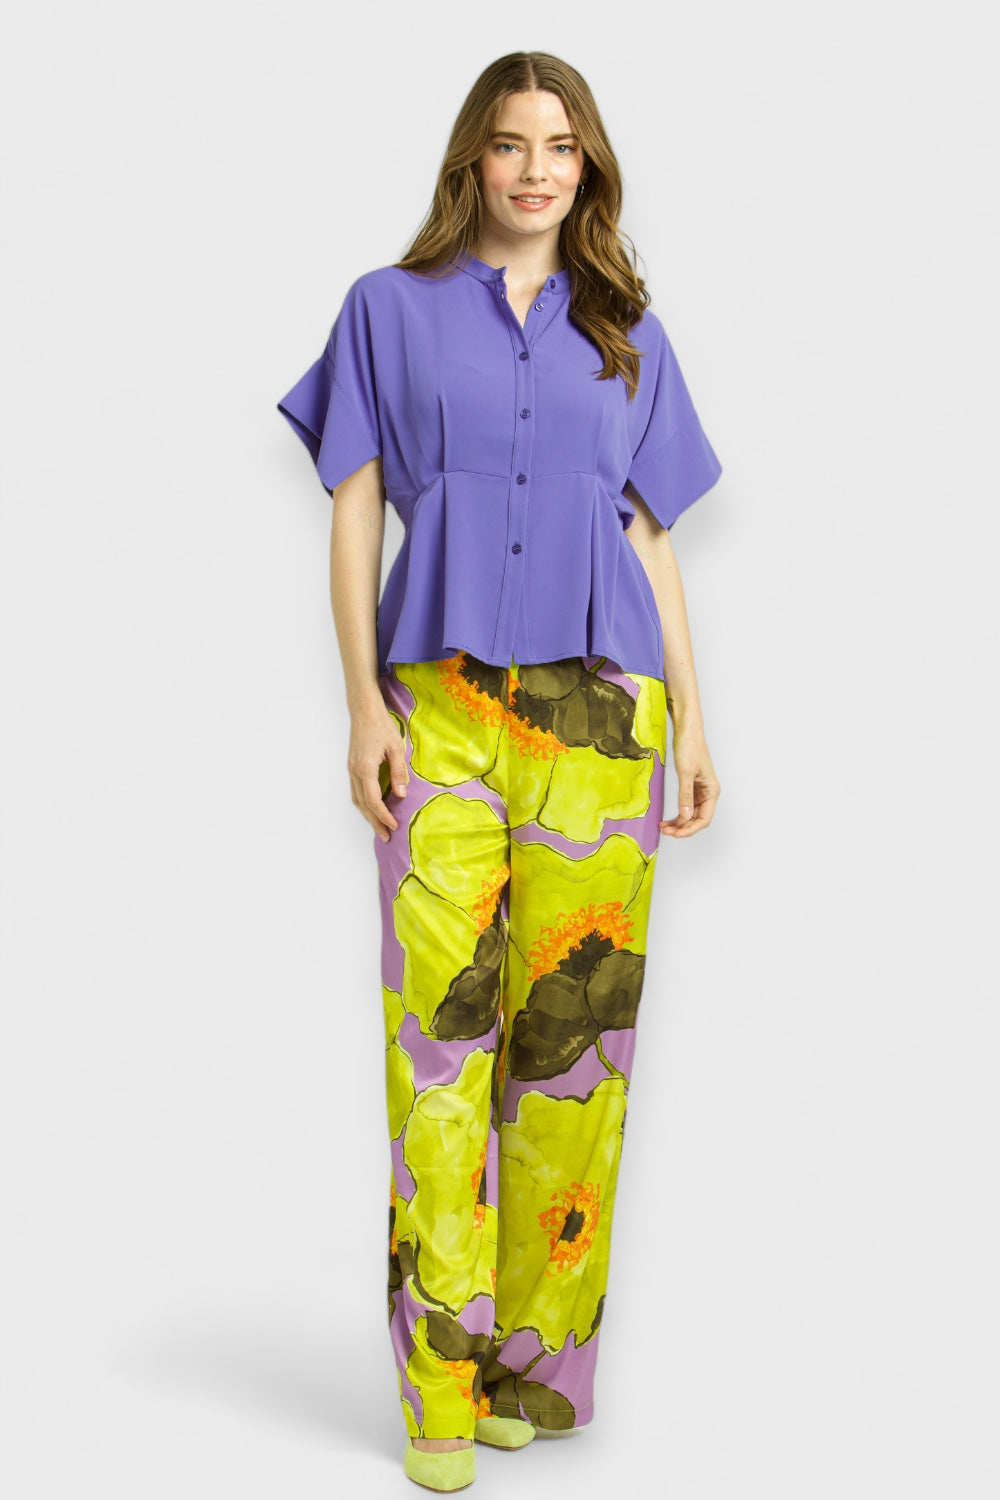 Orchid Floral Print Satin Palazzo Pants Trousers by Enhle Italian Women's Clothing Paired with Lilac Peplum Blouse